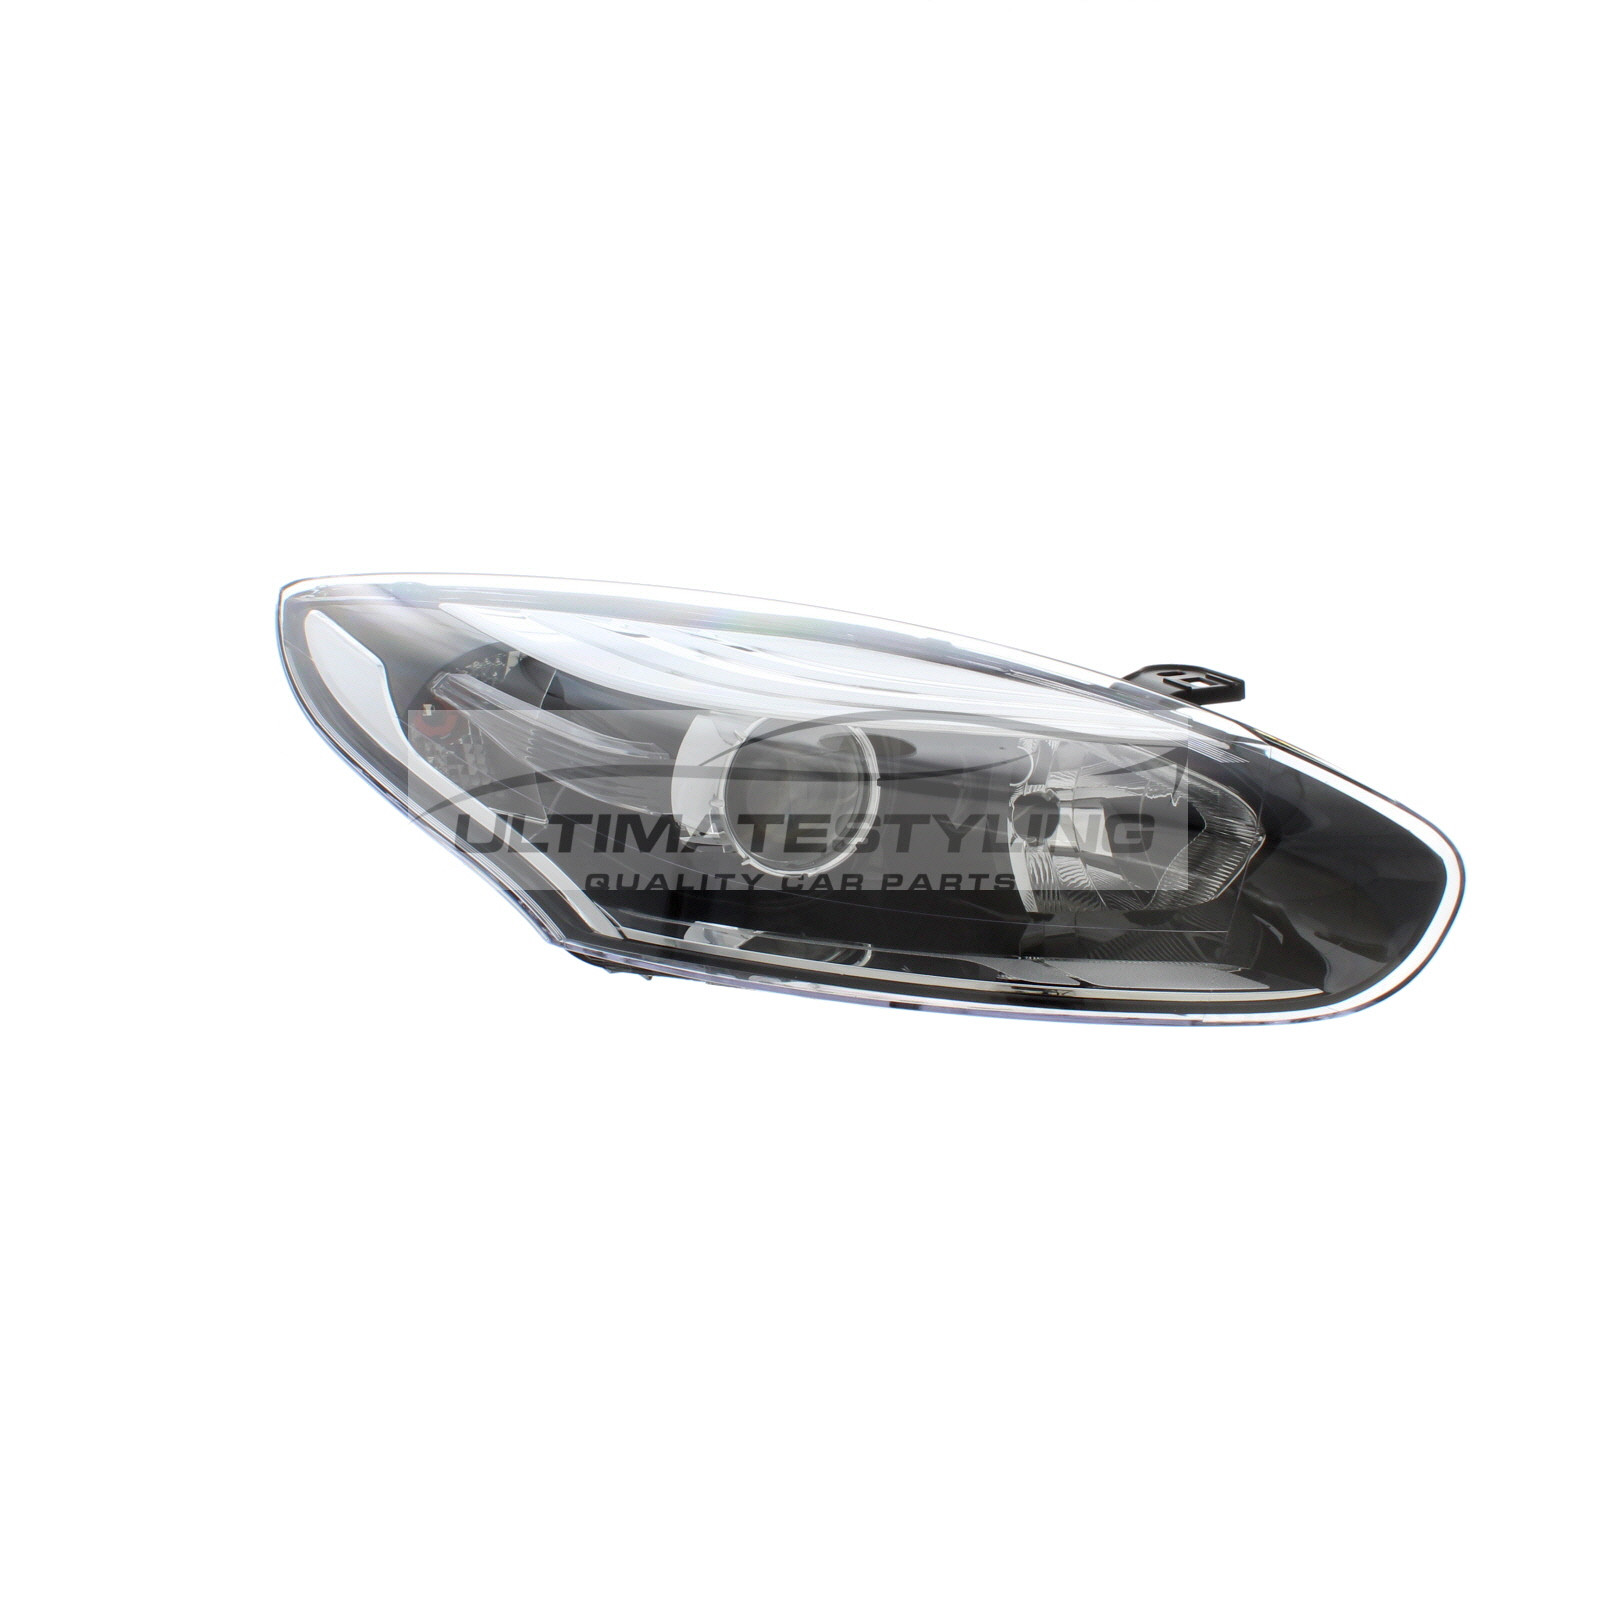 Renault Megane 2014-2016 Halogen, Electric With Motor, Black Headlight / Headlamp with Chrome Surround Drivers Side (RH)